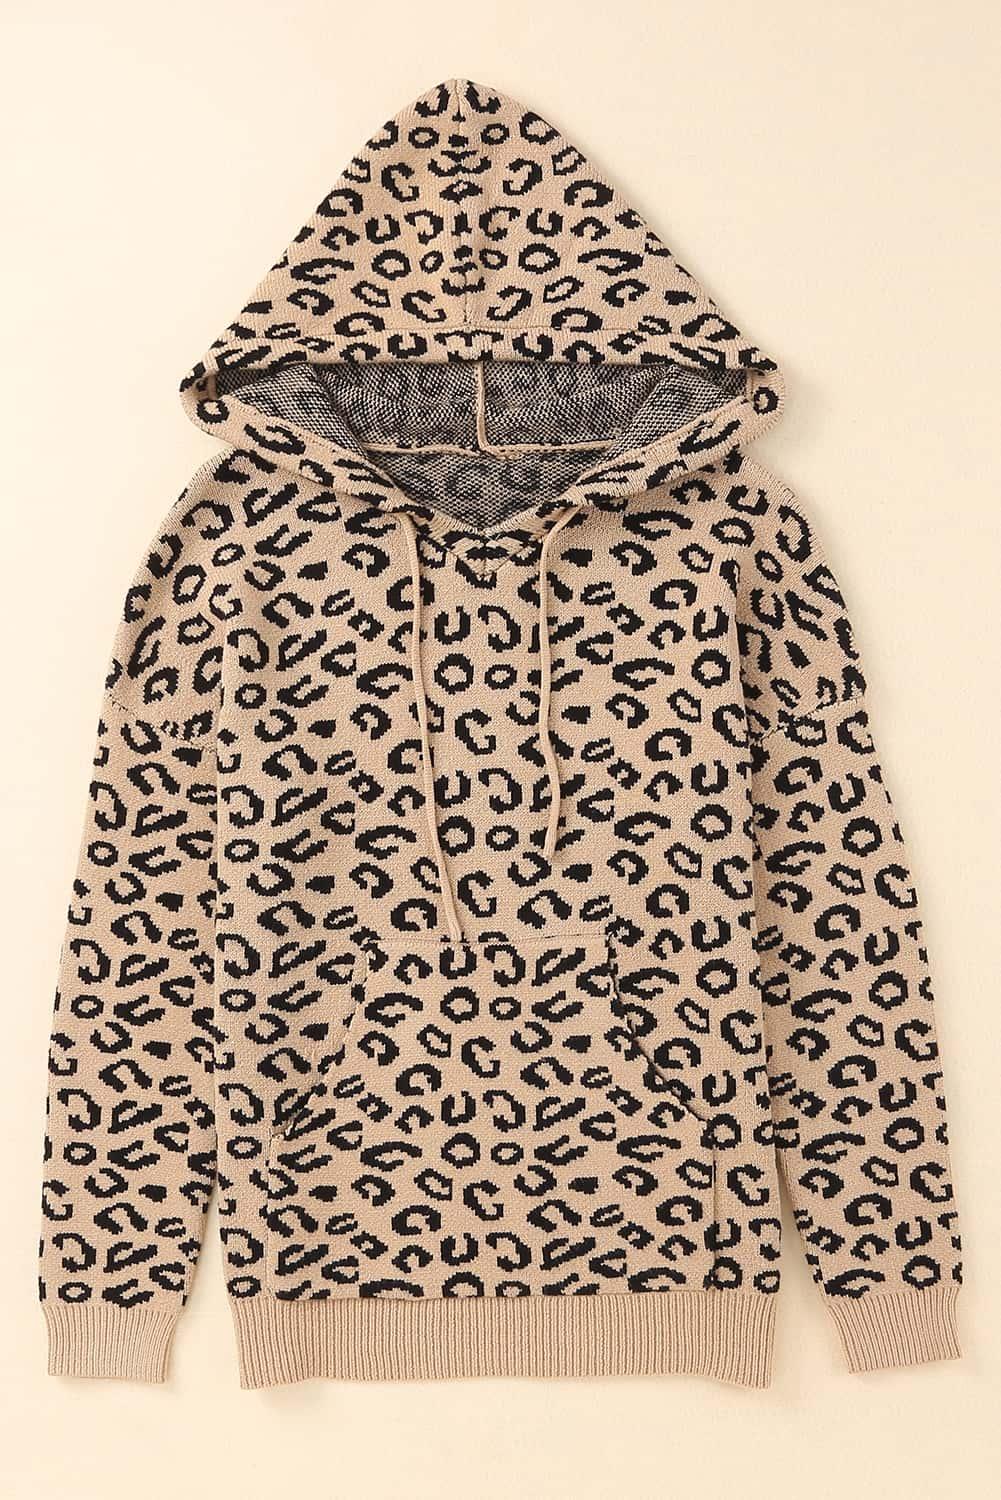 Leopard Print Drawstring Hooded Sweater - itsshirty